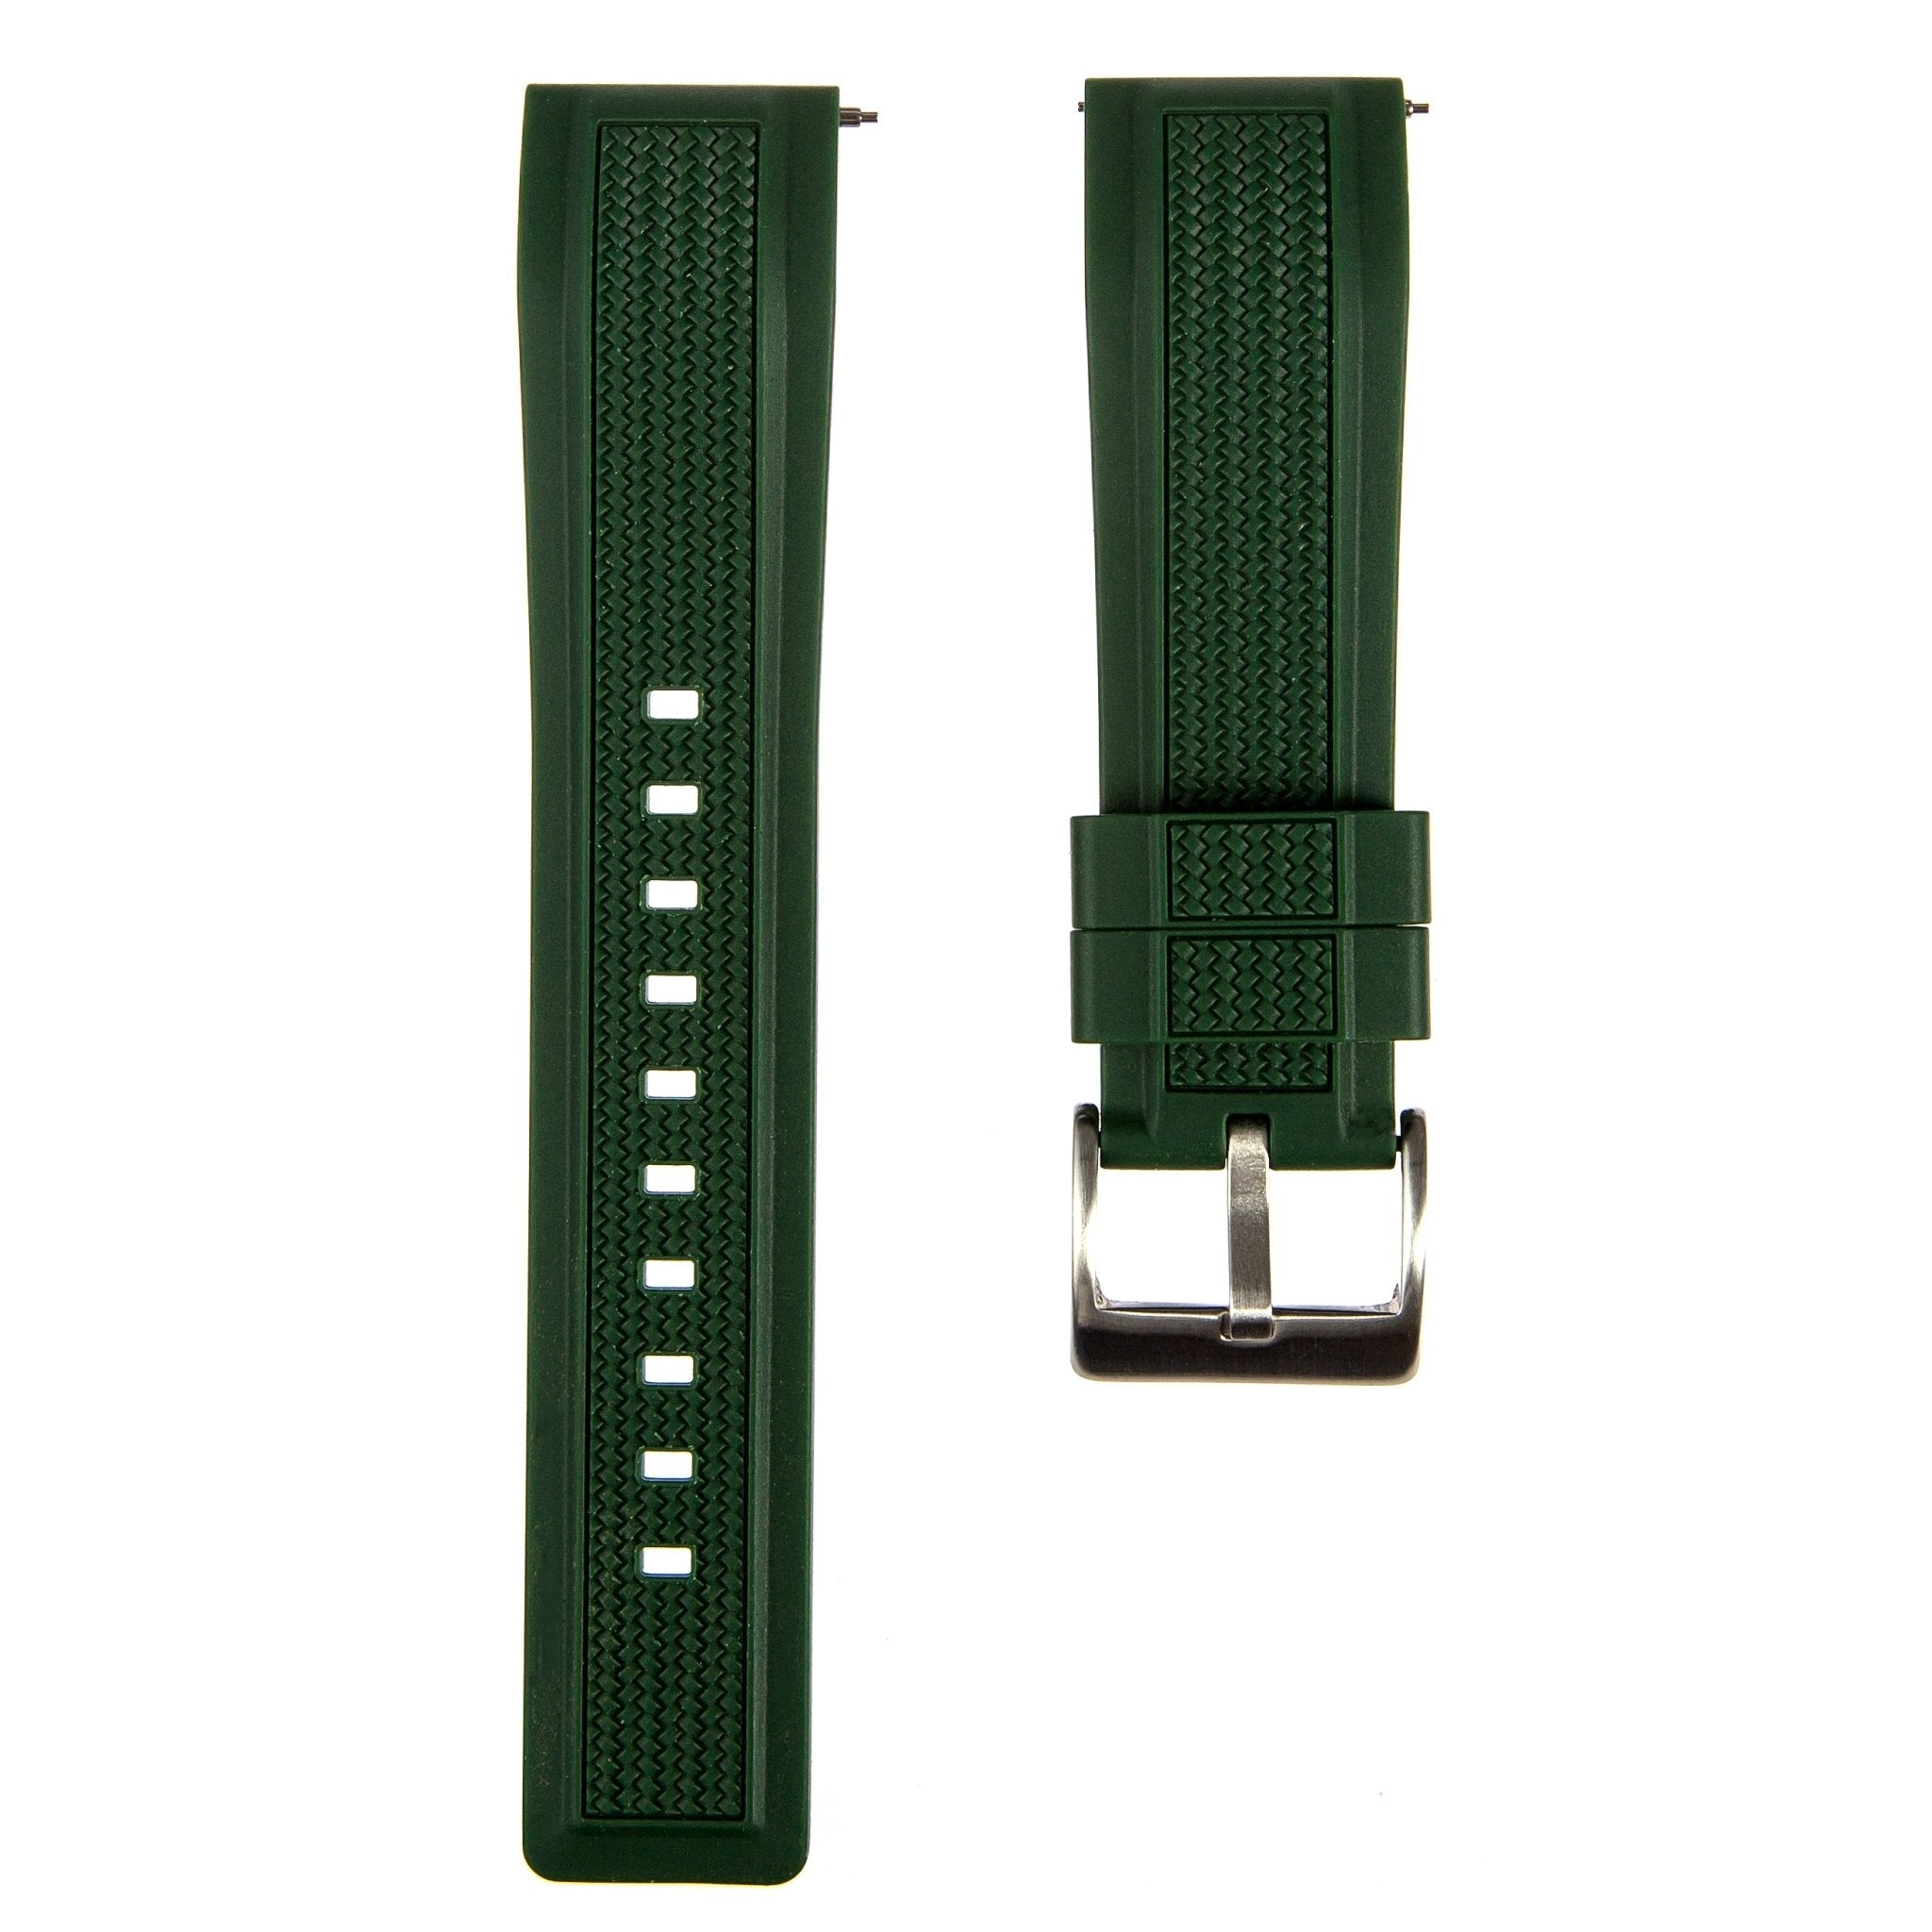 Stryke Premium SIlicone Rubber Strap - Quick-Release - Compatible with Blancpain x Swatch – Green (2424) -StrapSeeker